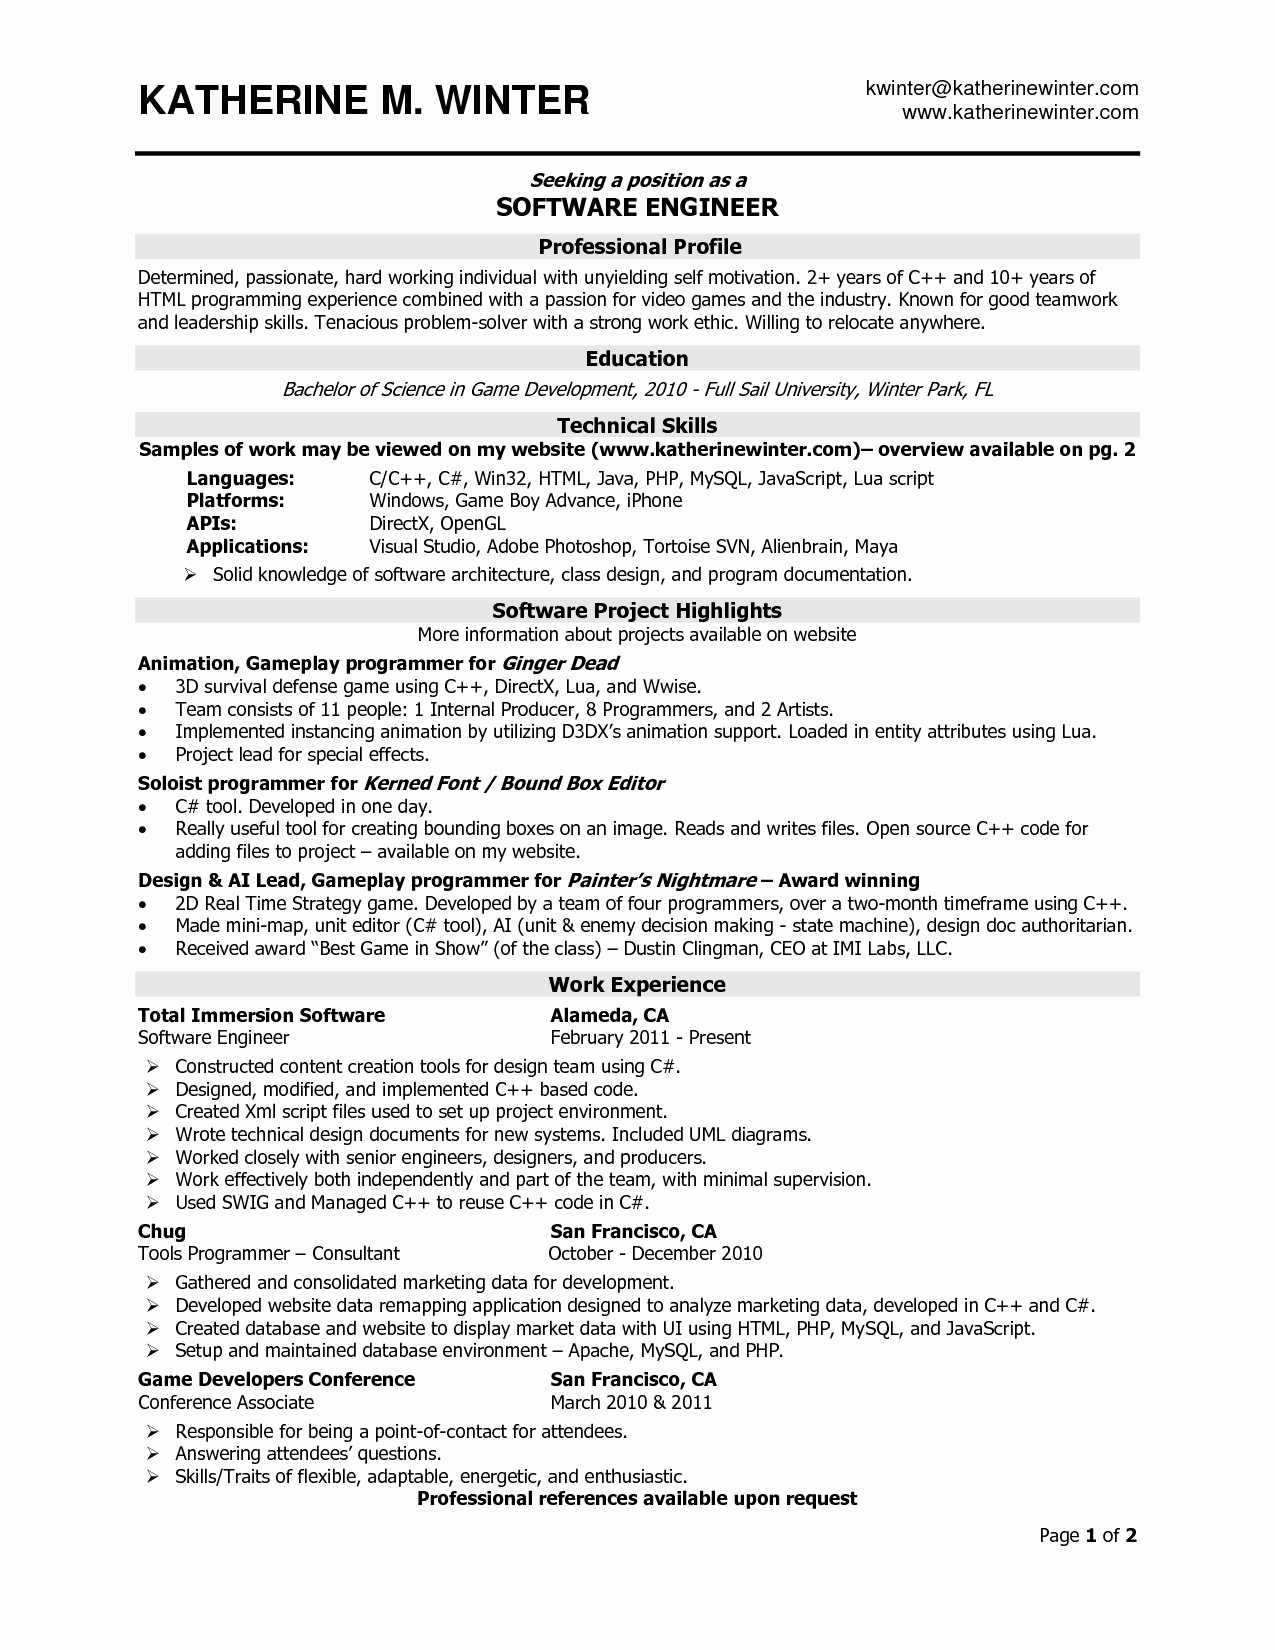 Sample Resume Format For 5 Years Experience 